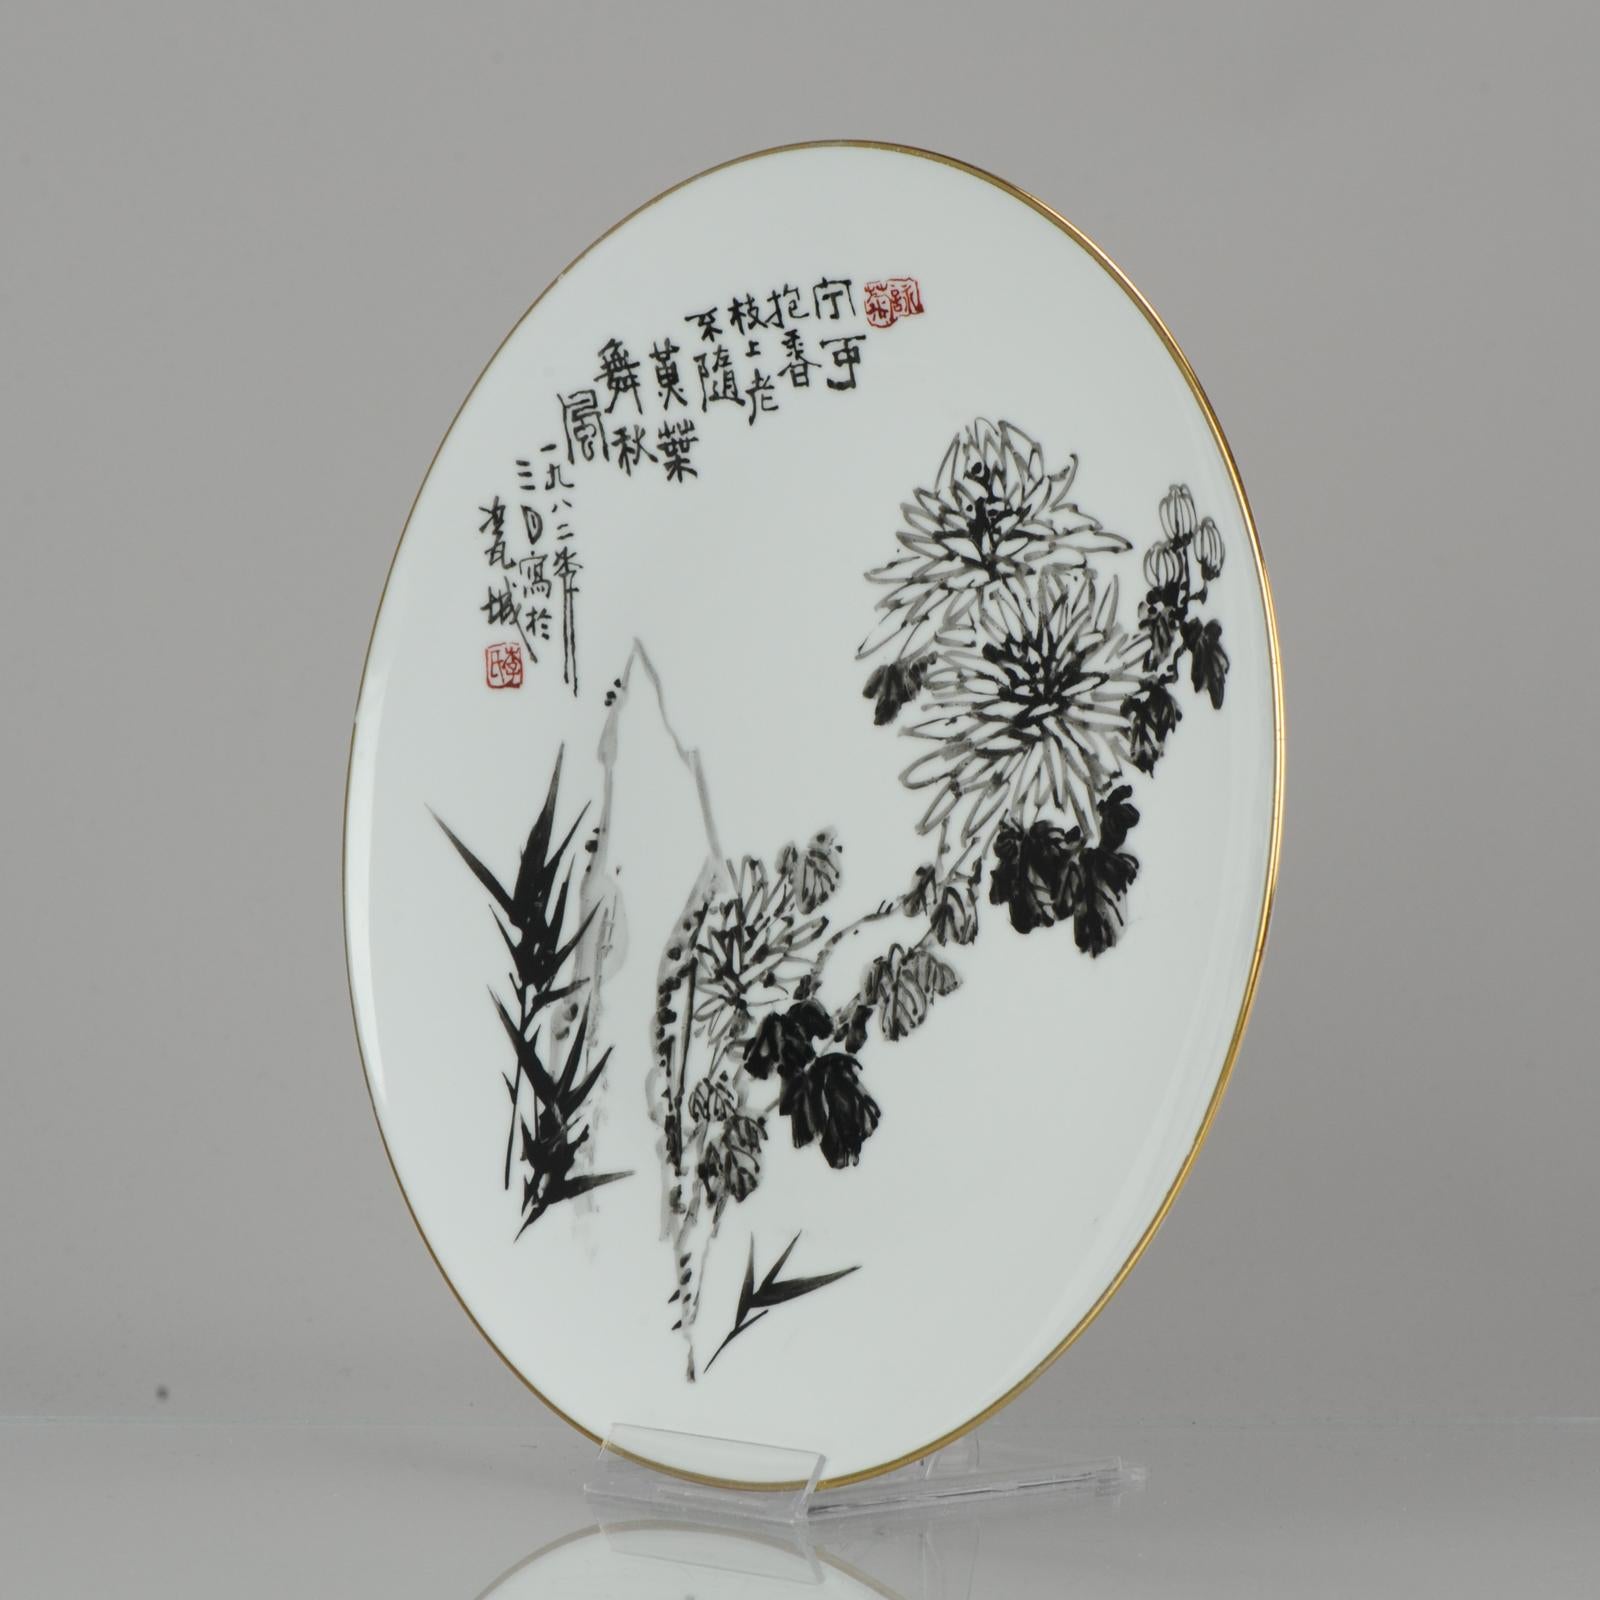 Lovely 1982 Poem Calligraphy Plate China Chinese Porcelain Proc In Excellent Condition For Sale In Amsterdam, Noord Holland